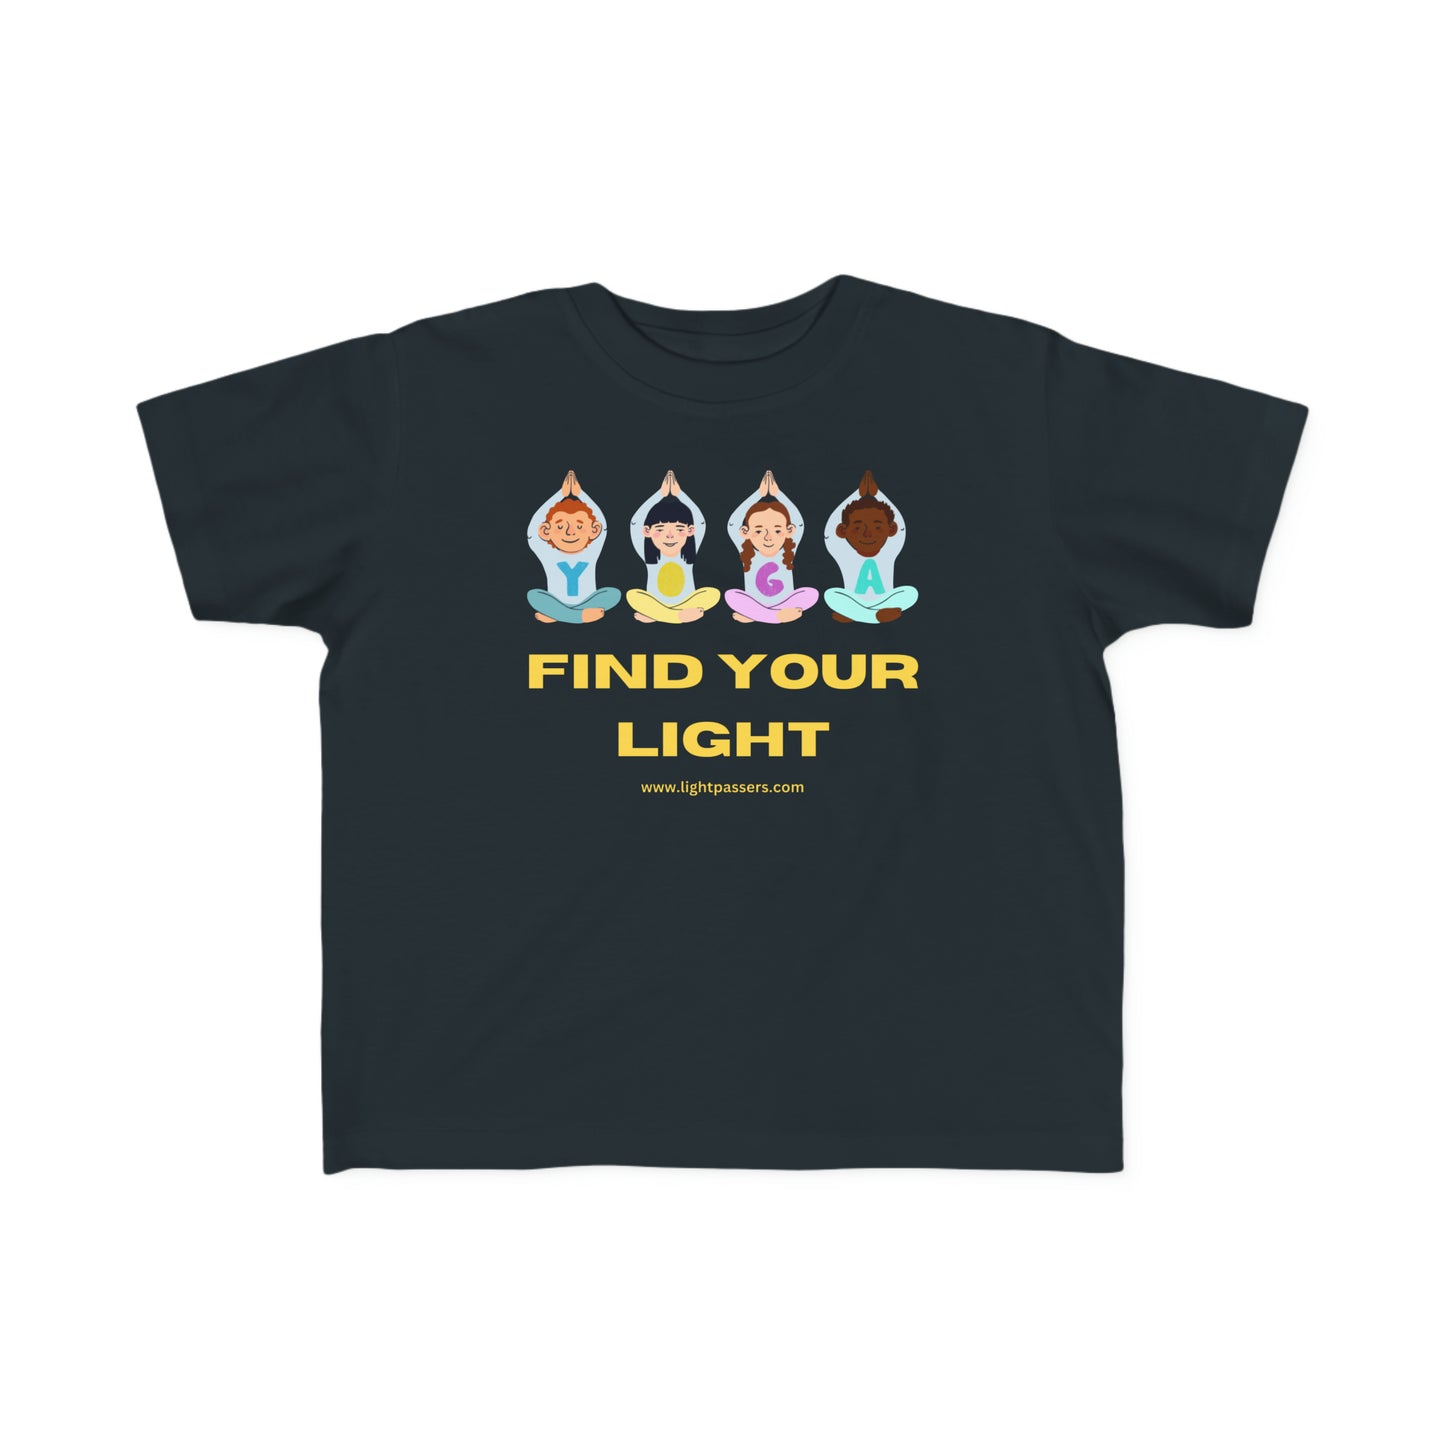 Light Passers Marketplace Yoga Find Your Light Toddler Fine Jersey T-shirt Simple Messages, Fitness, Mental Health, Diversity